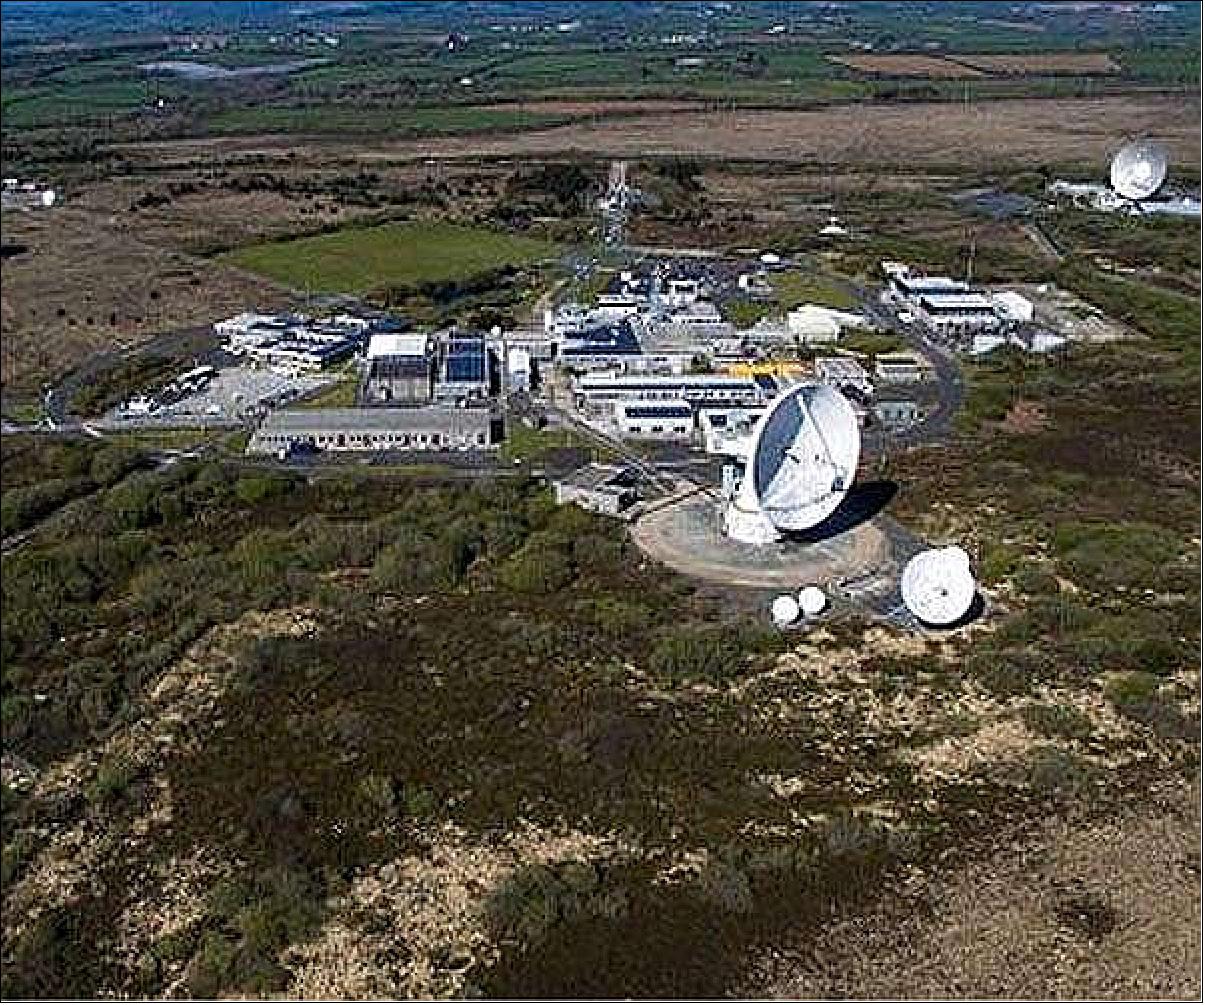 Figure 34: Photo of the Goonhilly Earth station complex located on the Lizard Peninsula of Cornwall (image credit: Satellite Applications Catapult)